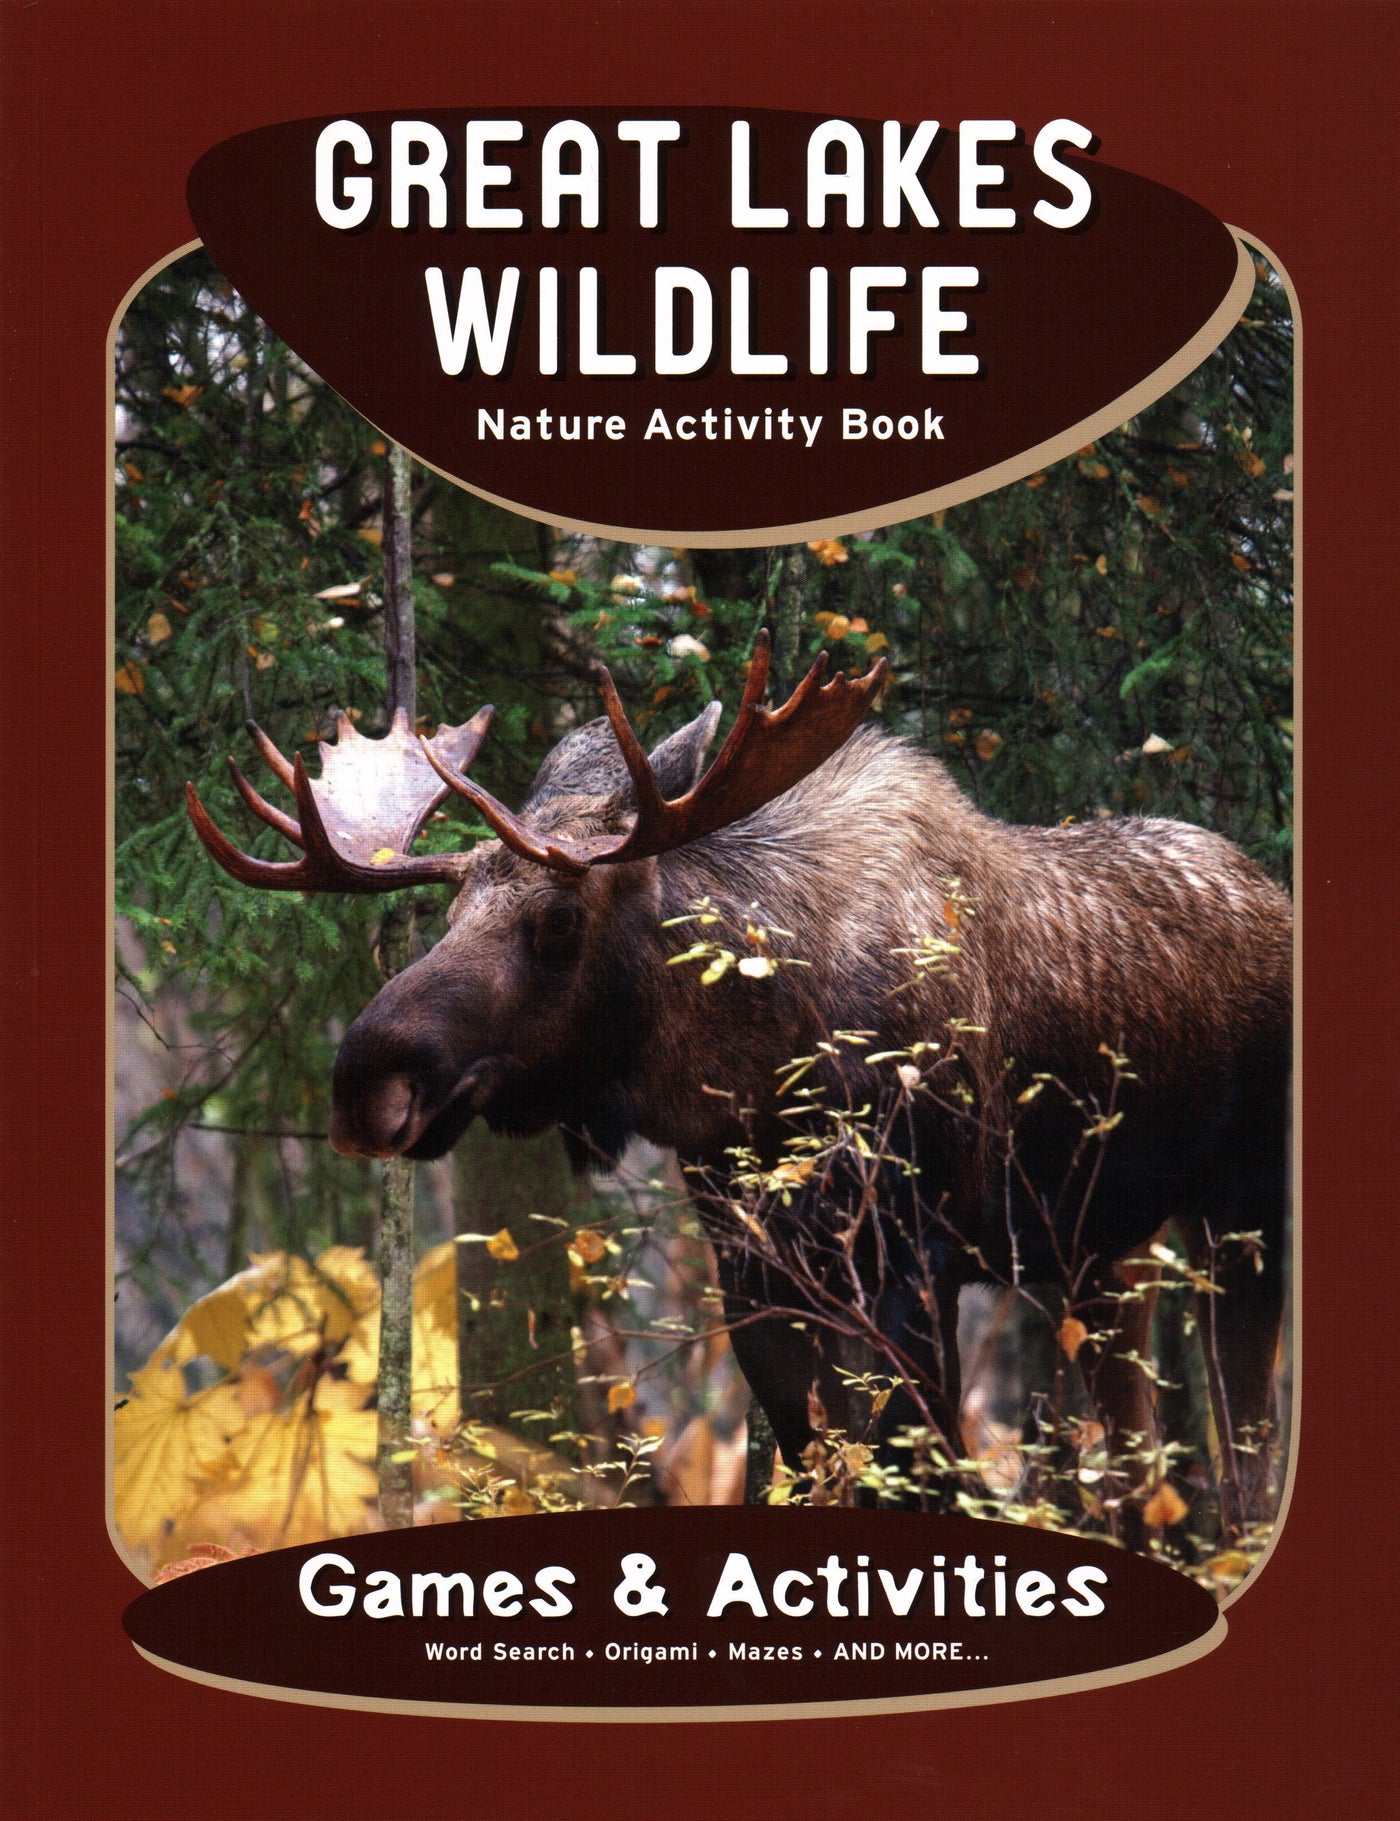 Great Lakes Wildlife Nature Activity Book